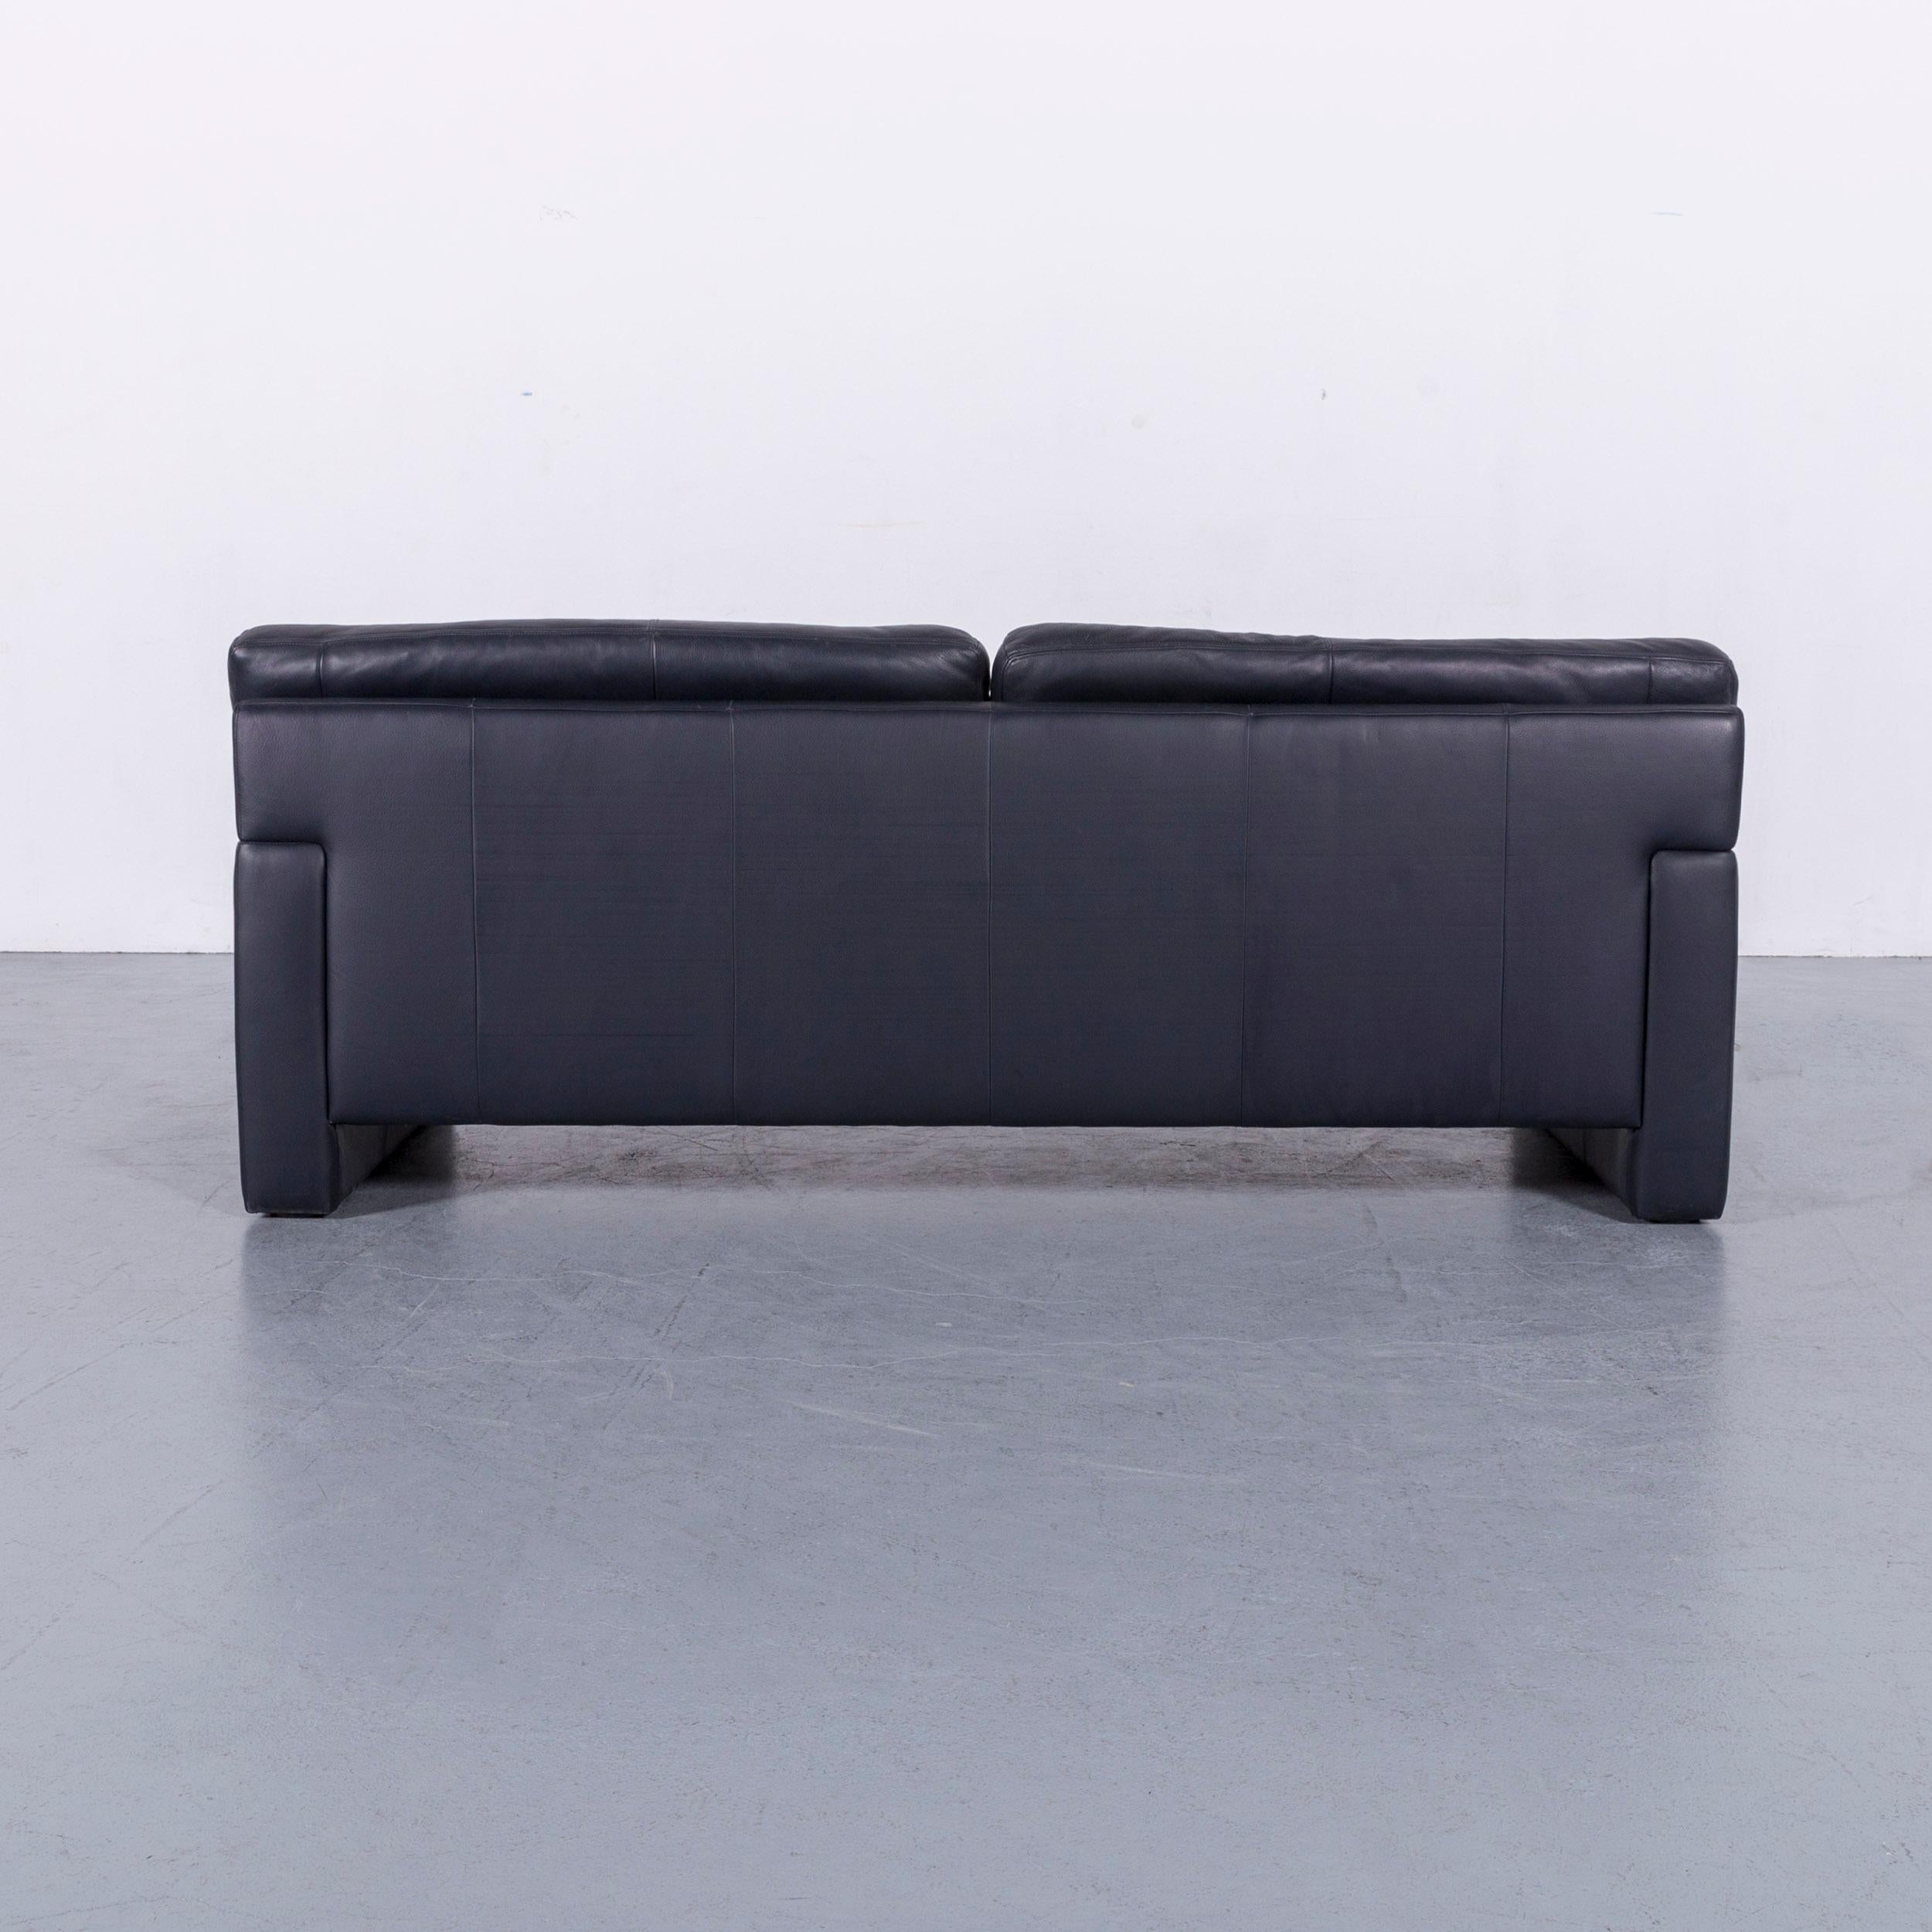 Erpo CL 300 Leather Sofa Deep-Blue Three-Seat Couch 2